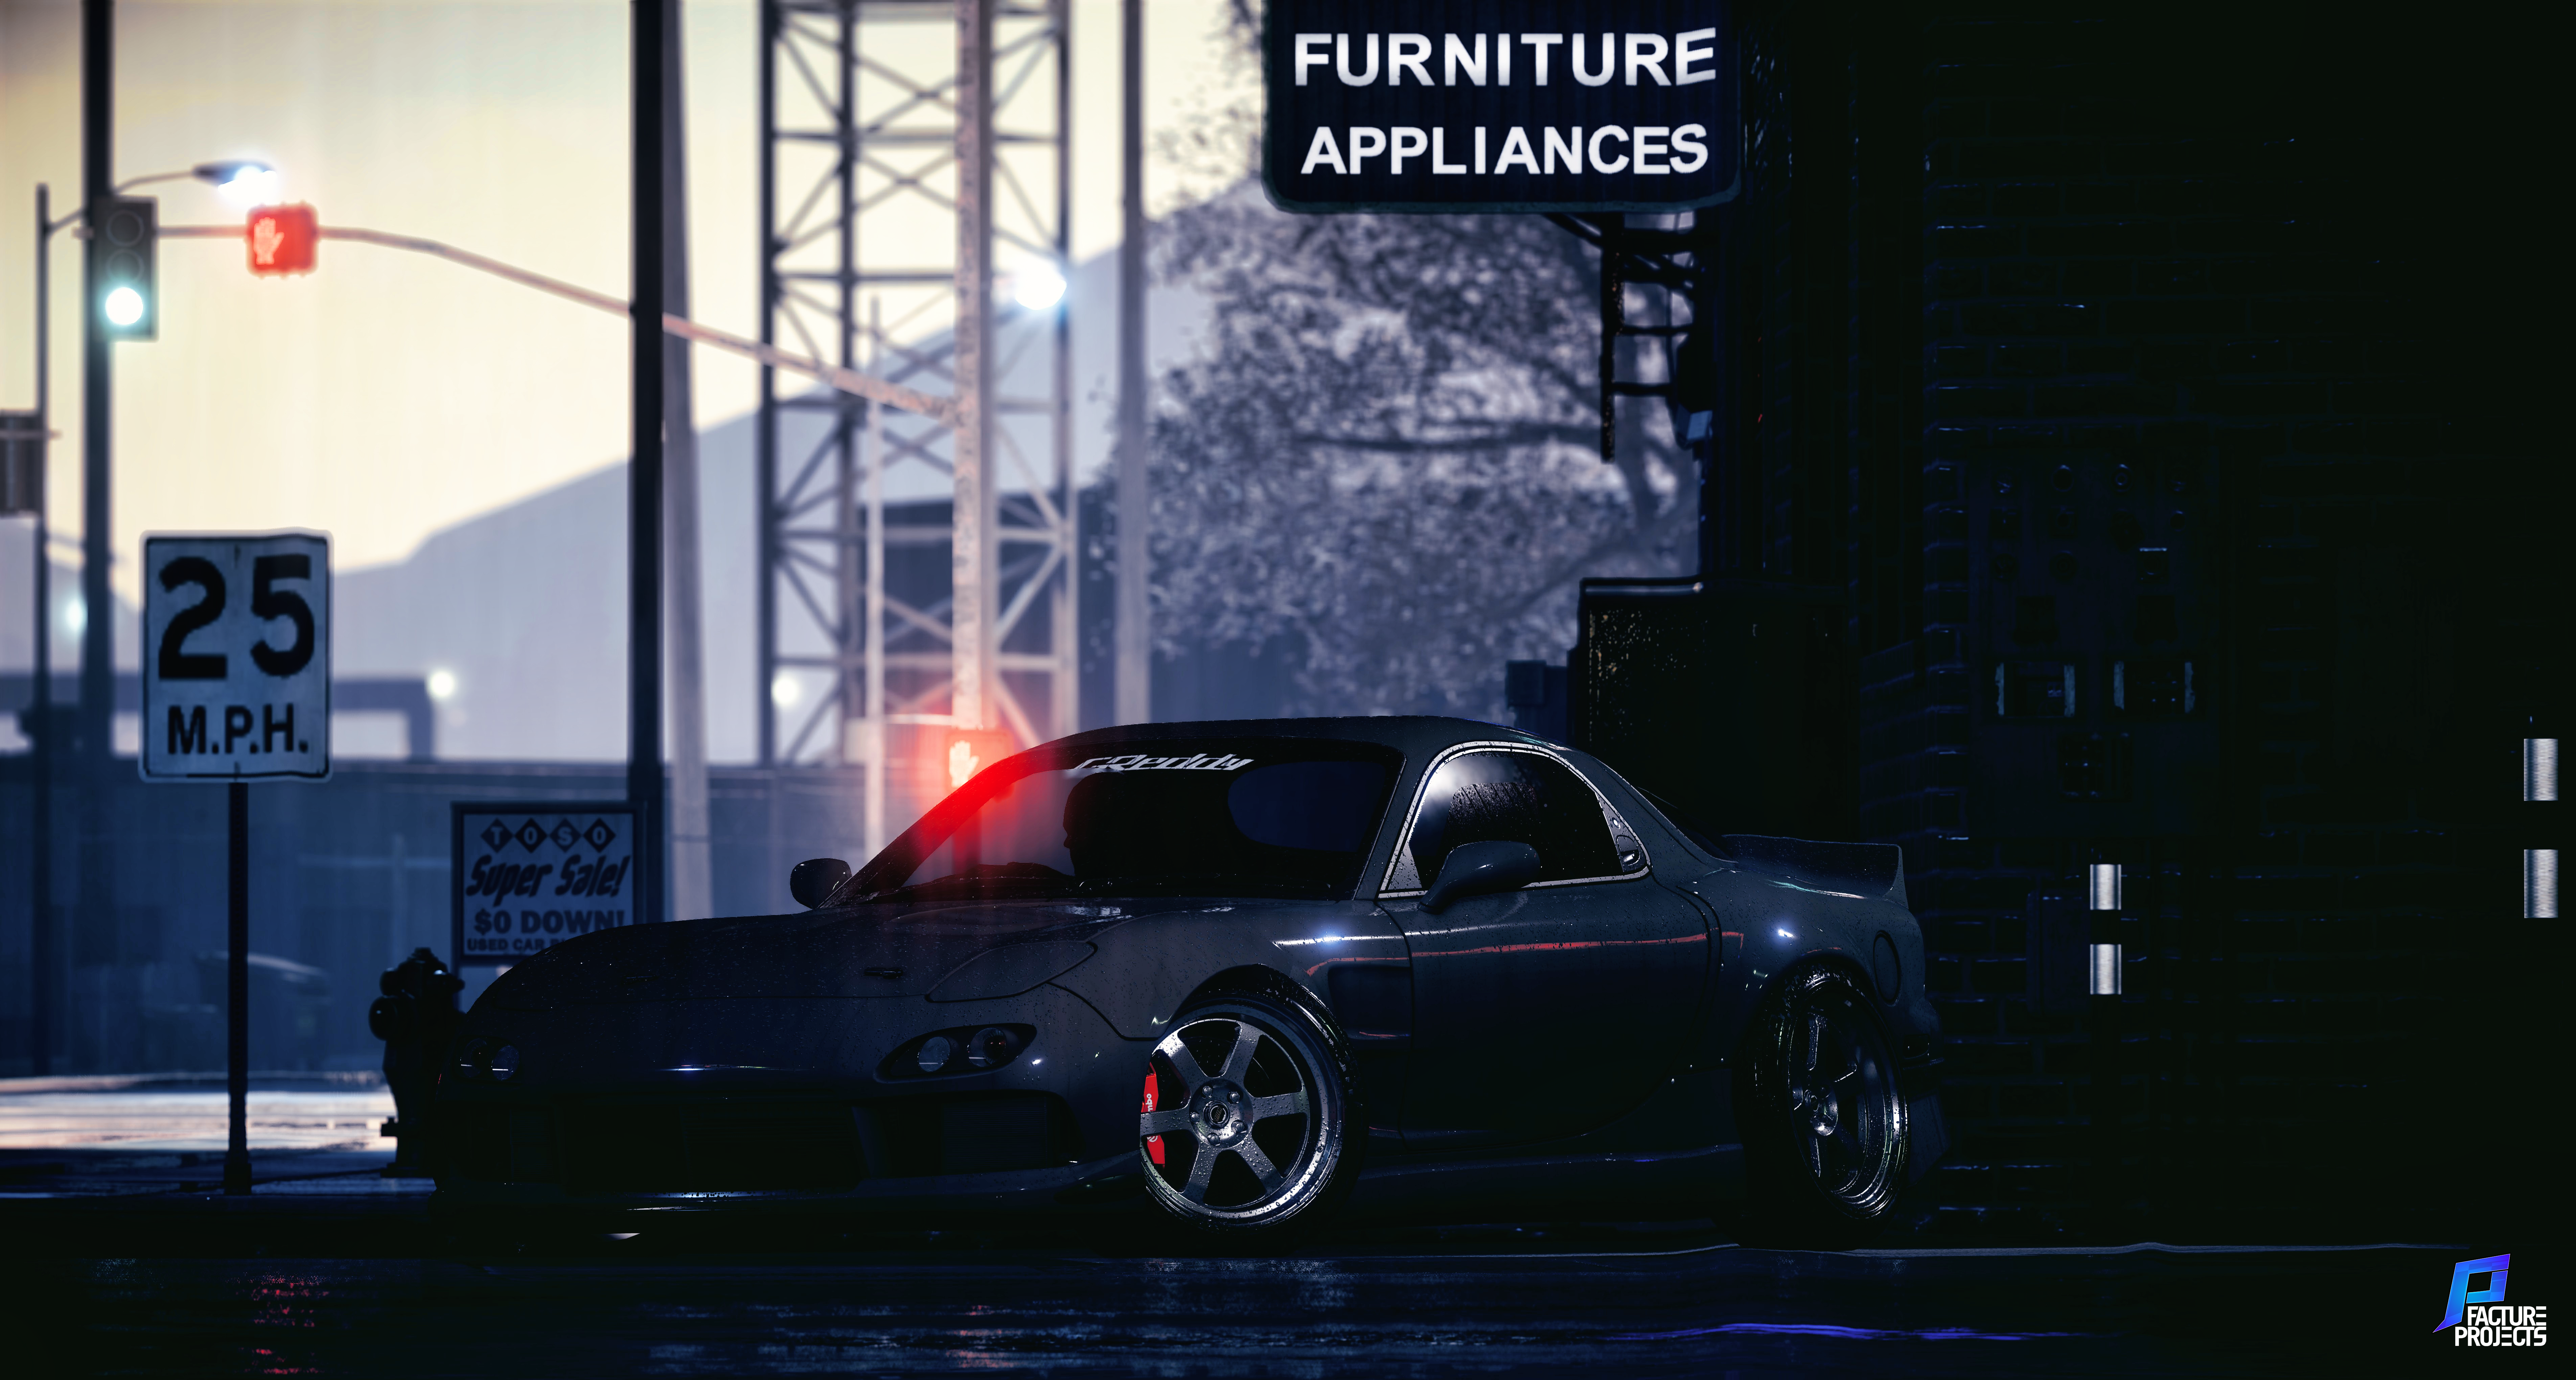 Mazda Rx7 Mazda RX 7 NFS 2015 Need For Speed Grey Cars Car 7616x4080